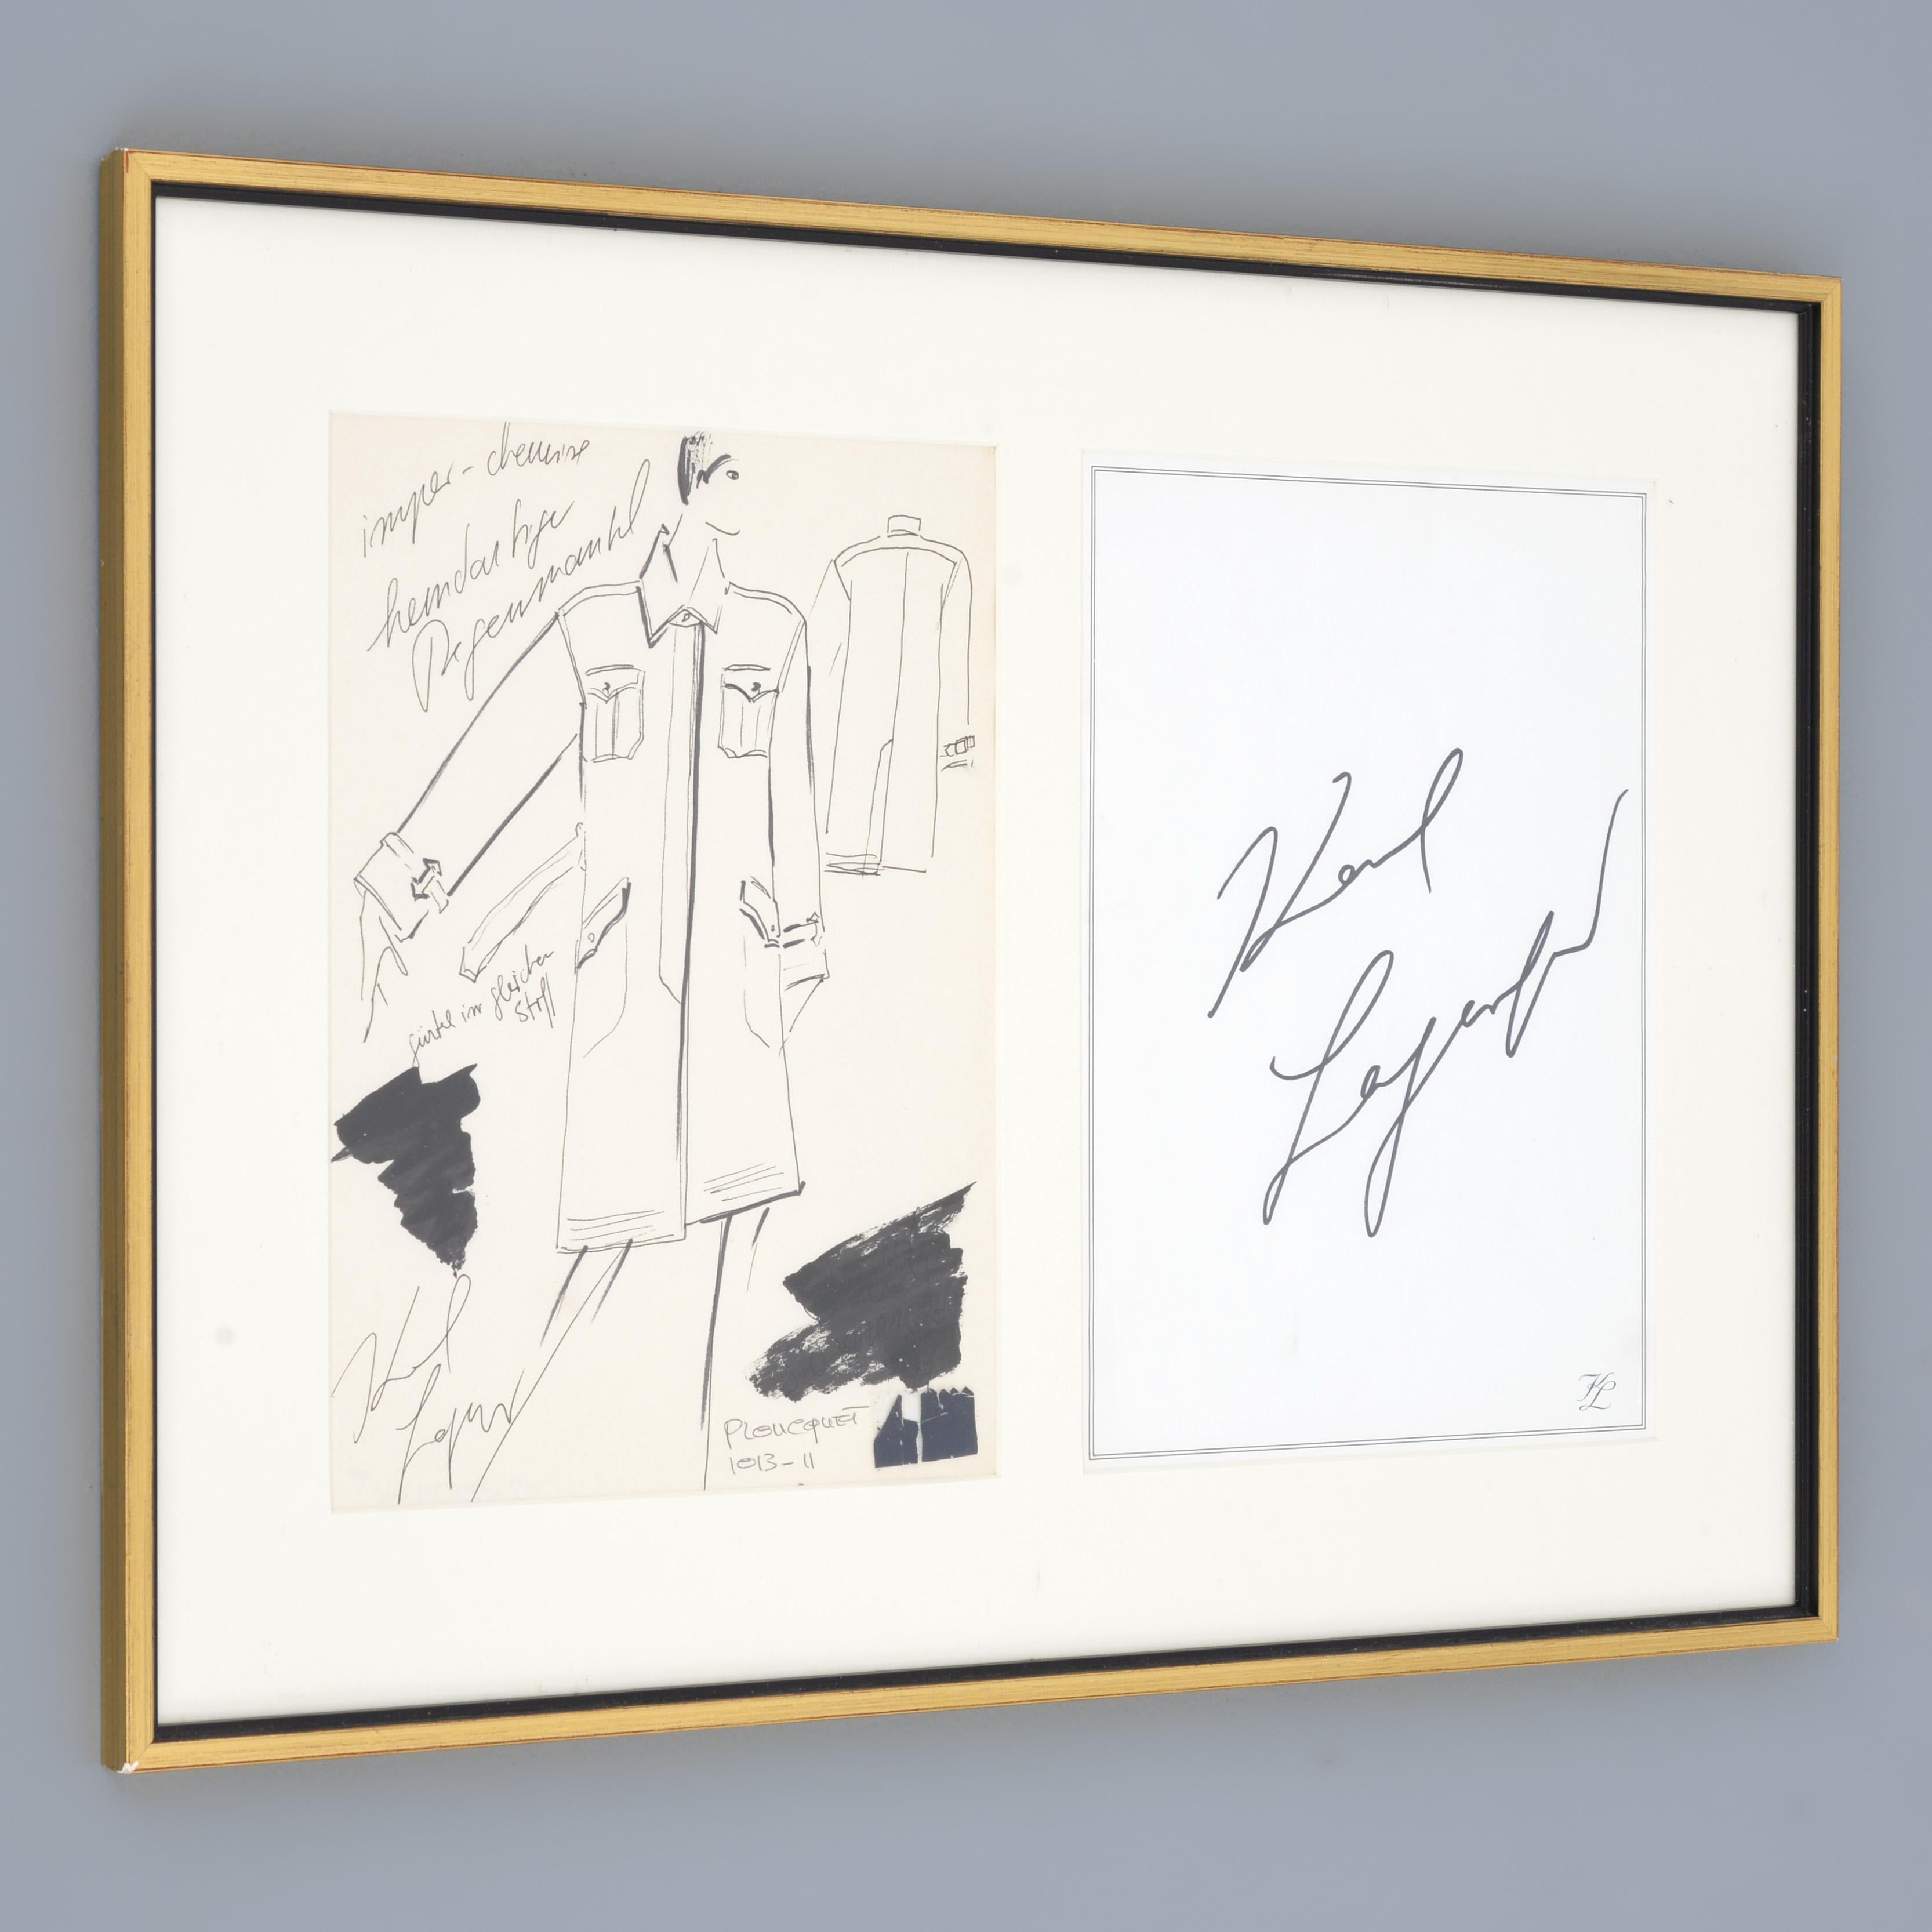 Artist/Designer; Manufacturer: Karl Lagerfeld (German, 1933-2019)
Marking(s); notes: signed, marking(s)
Materials: ink and fabric samples on paper
Dimensions (H, W, D): 11.5